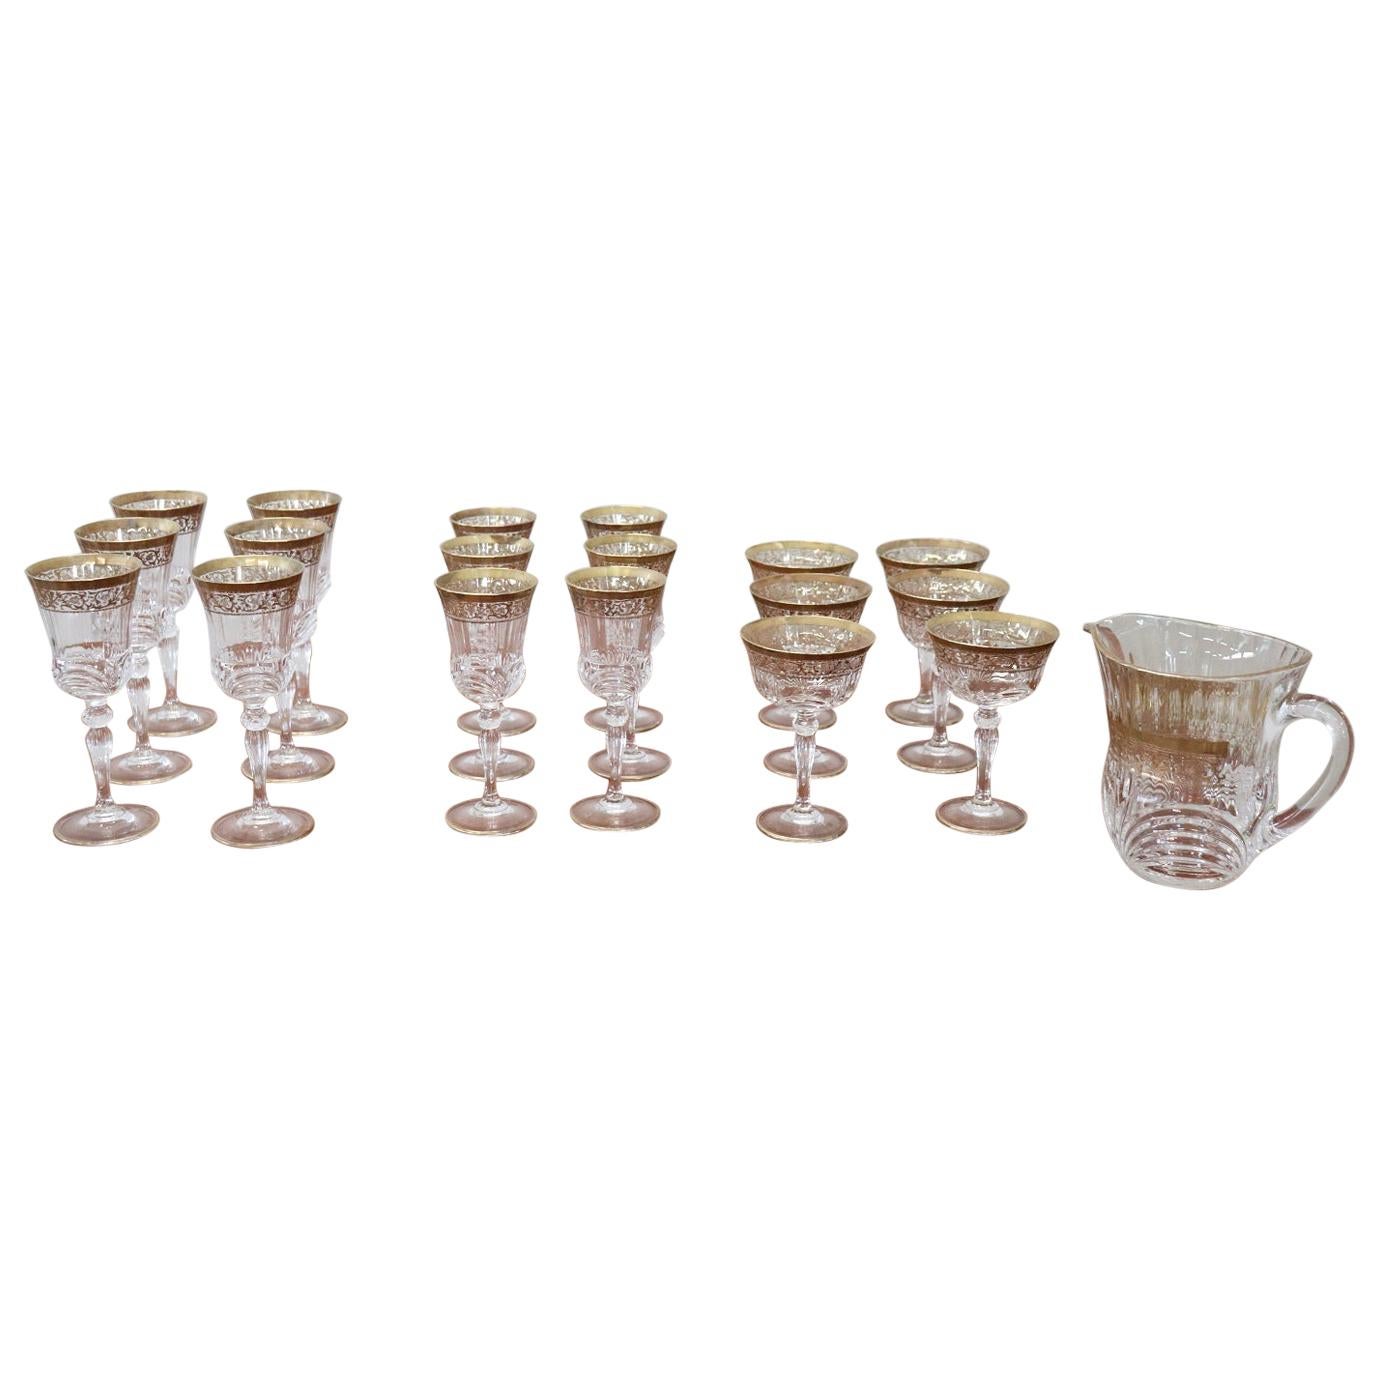 Luxury Crystals Glasses Set with Gold Decoration 24 Glasses and 1 Water Jug